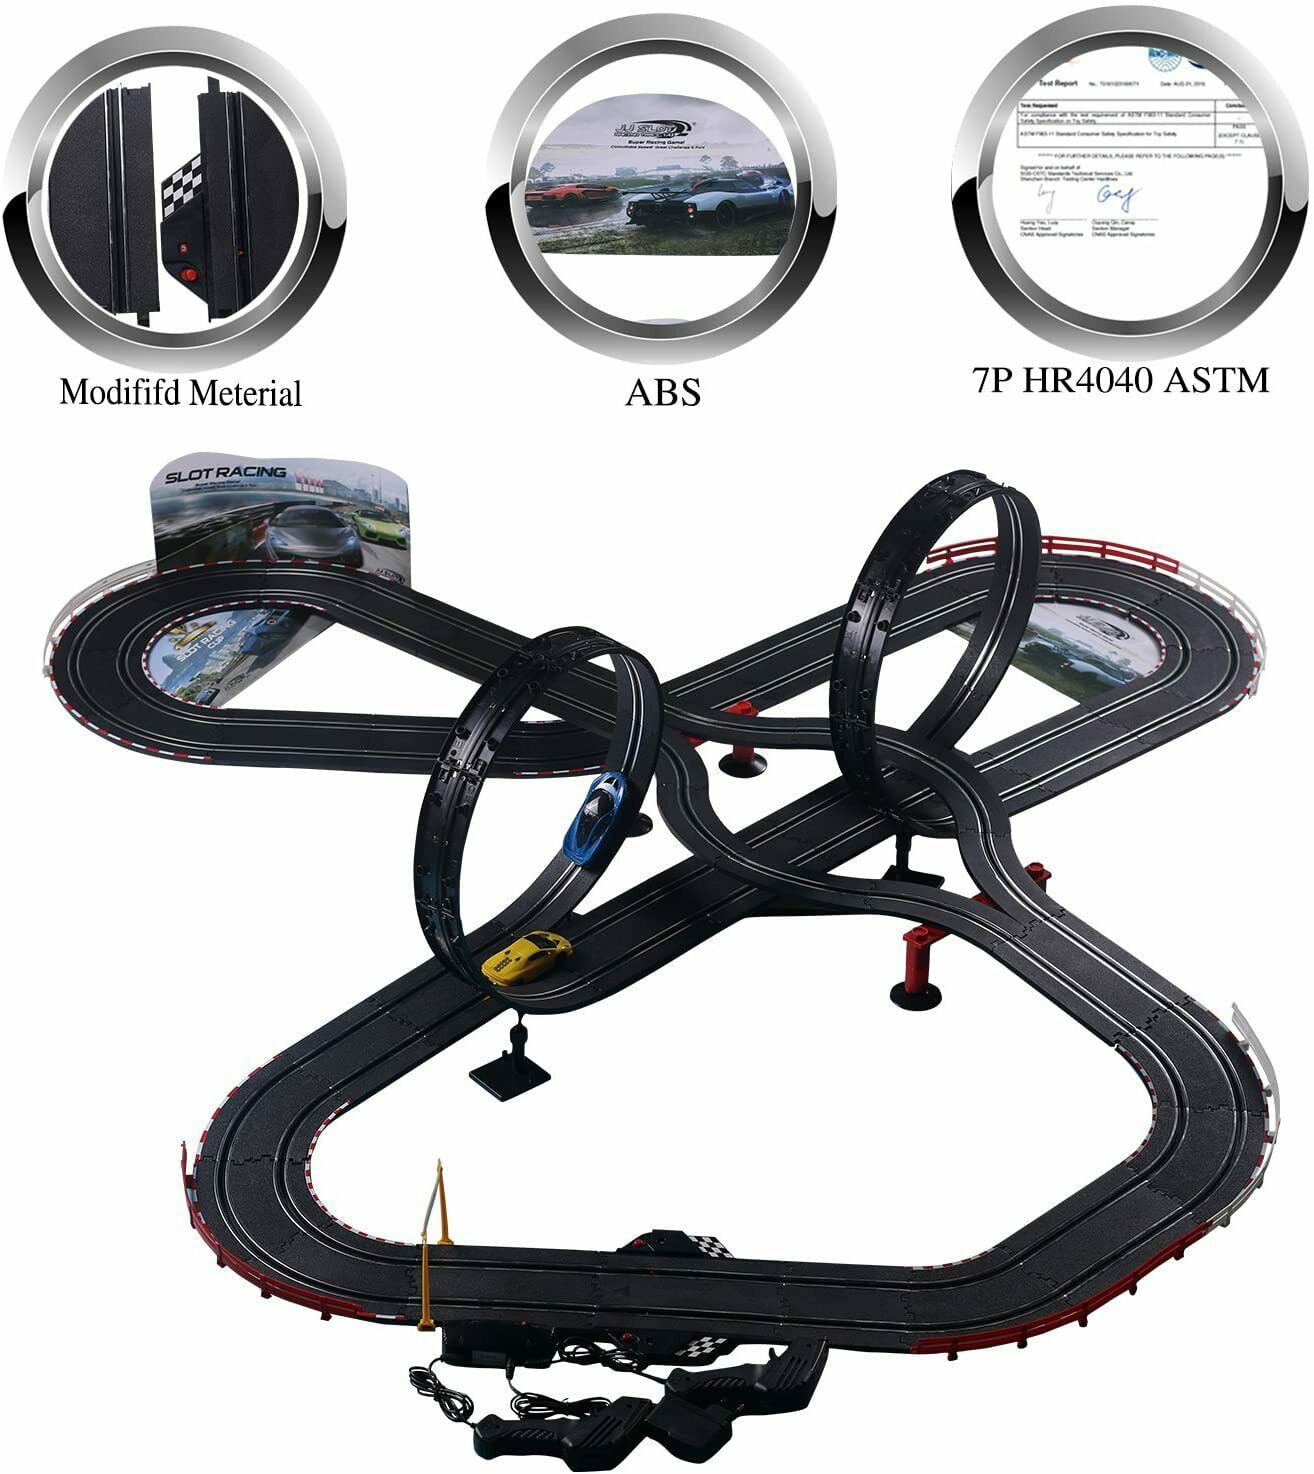 Buenotoys 1:43 Remote Control Track Slot Loops Turns Race Car Toy 401.51 Inch 